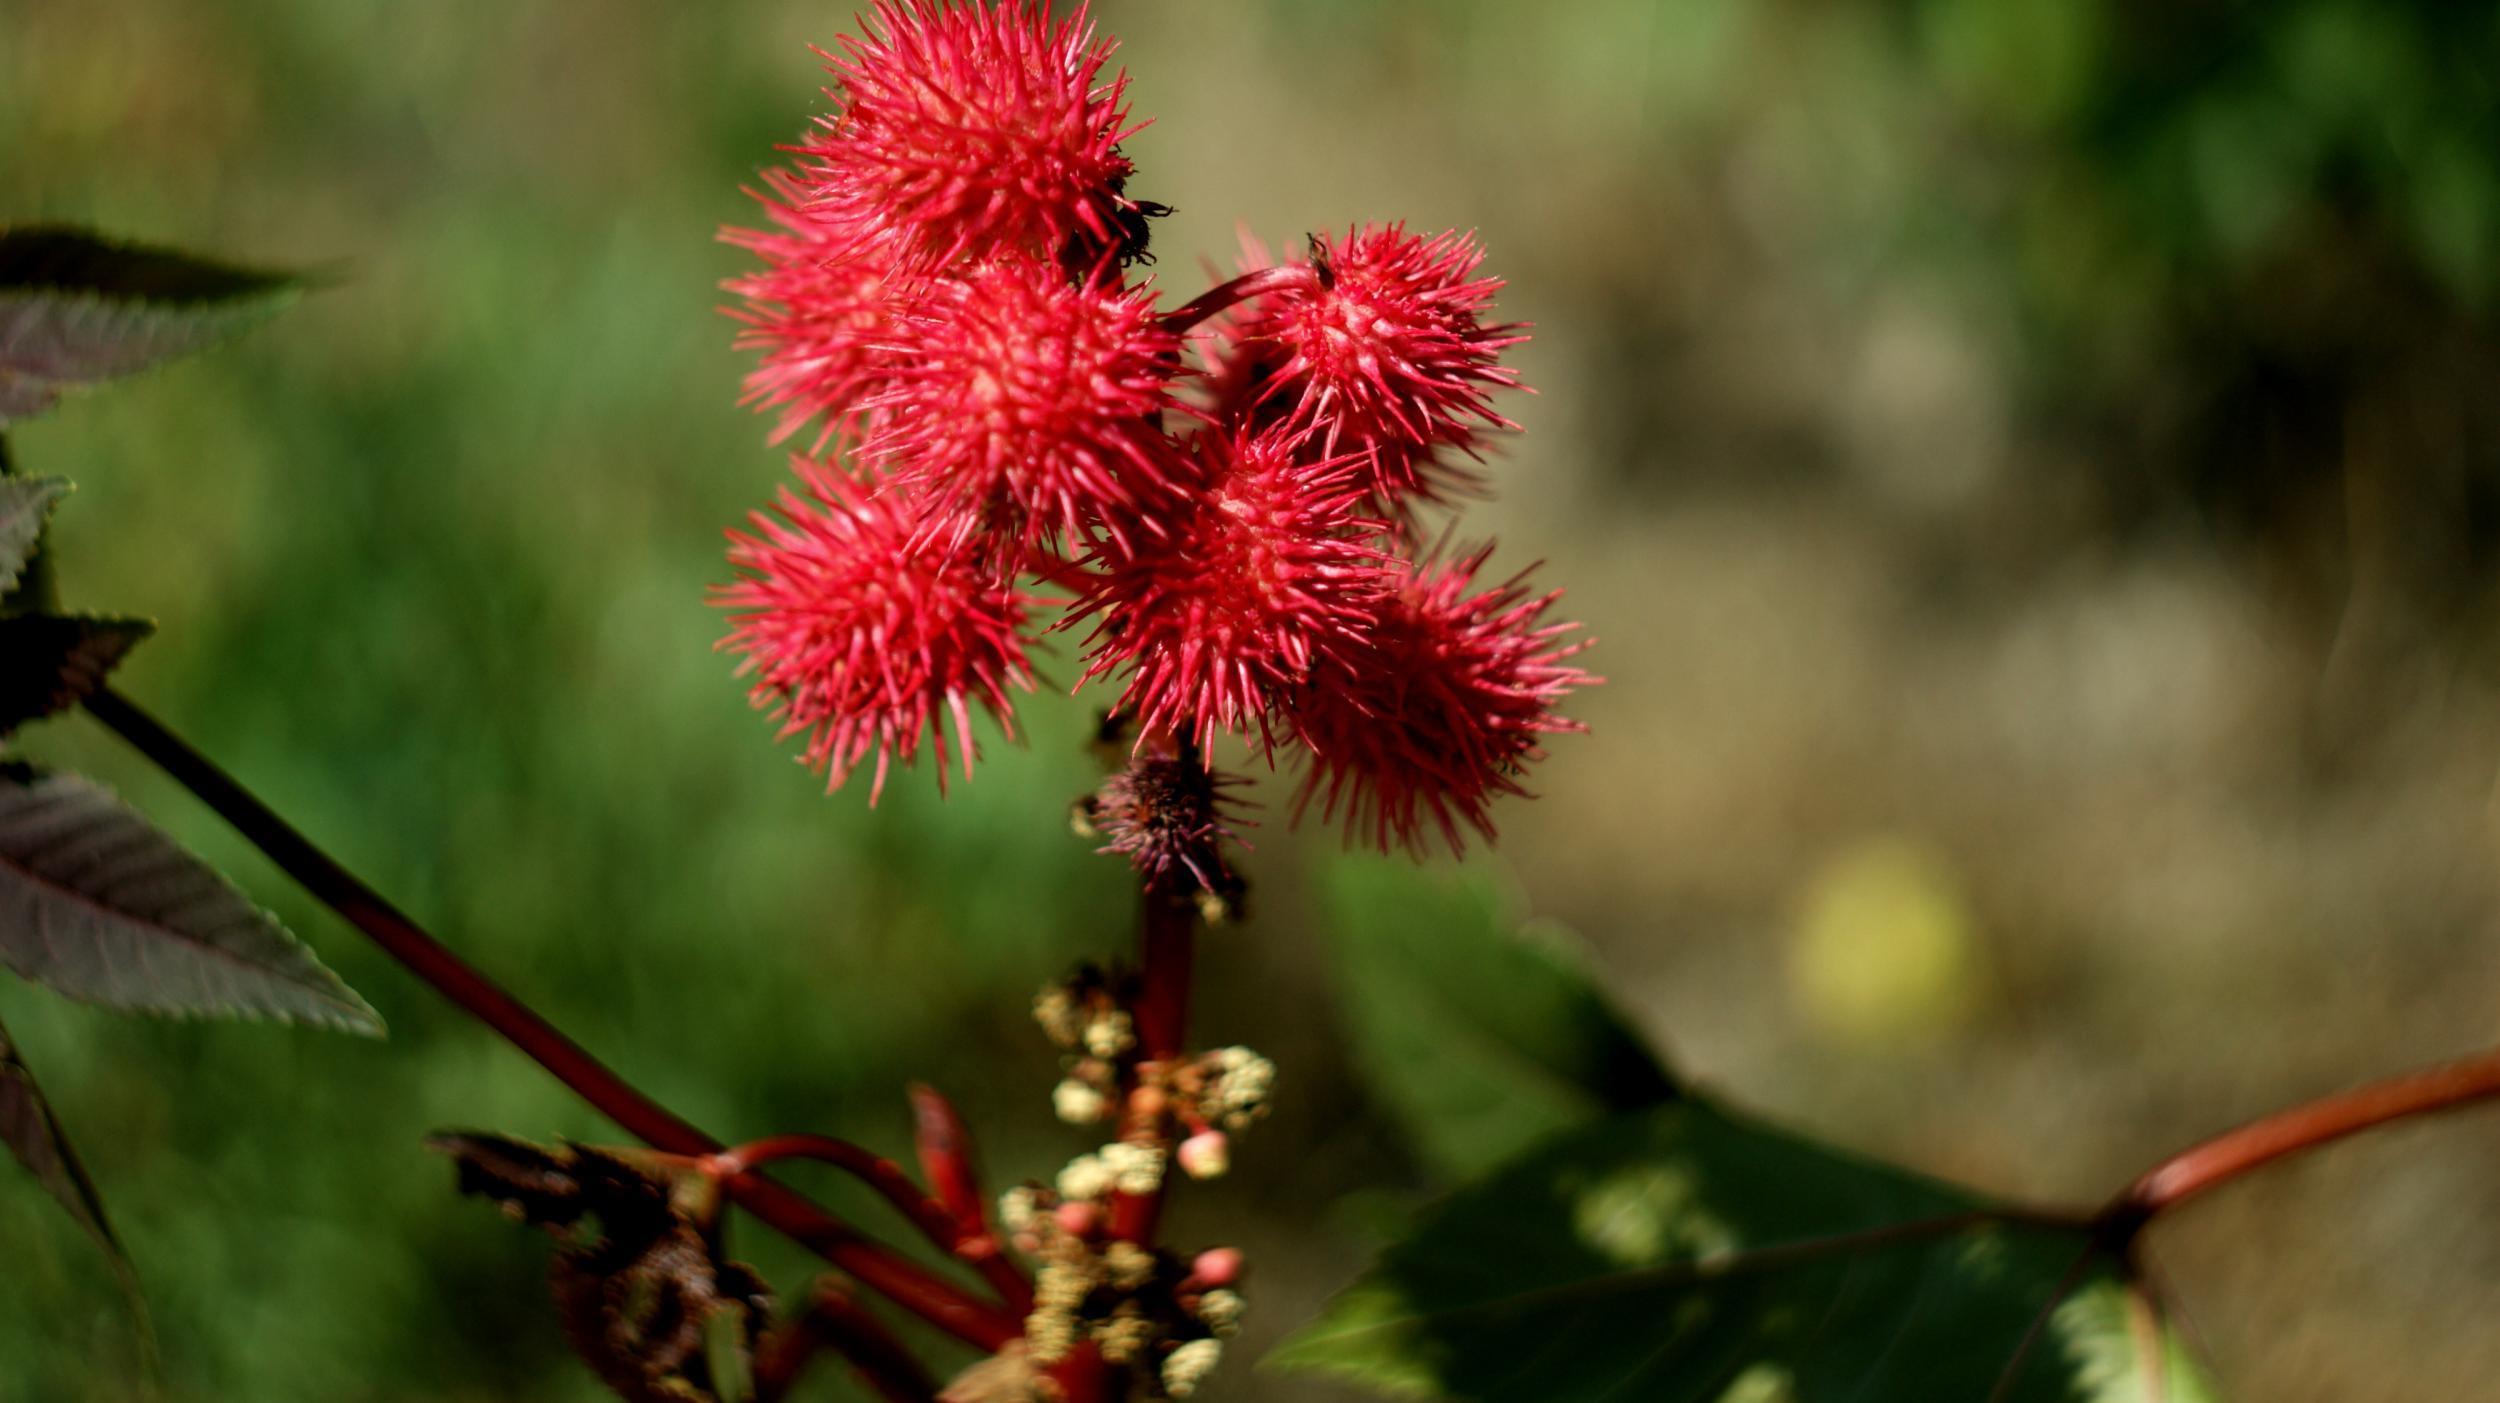 Ricin comes from the castor oil plant (above) and can kill even in small doses